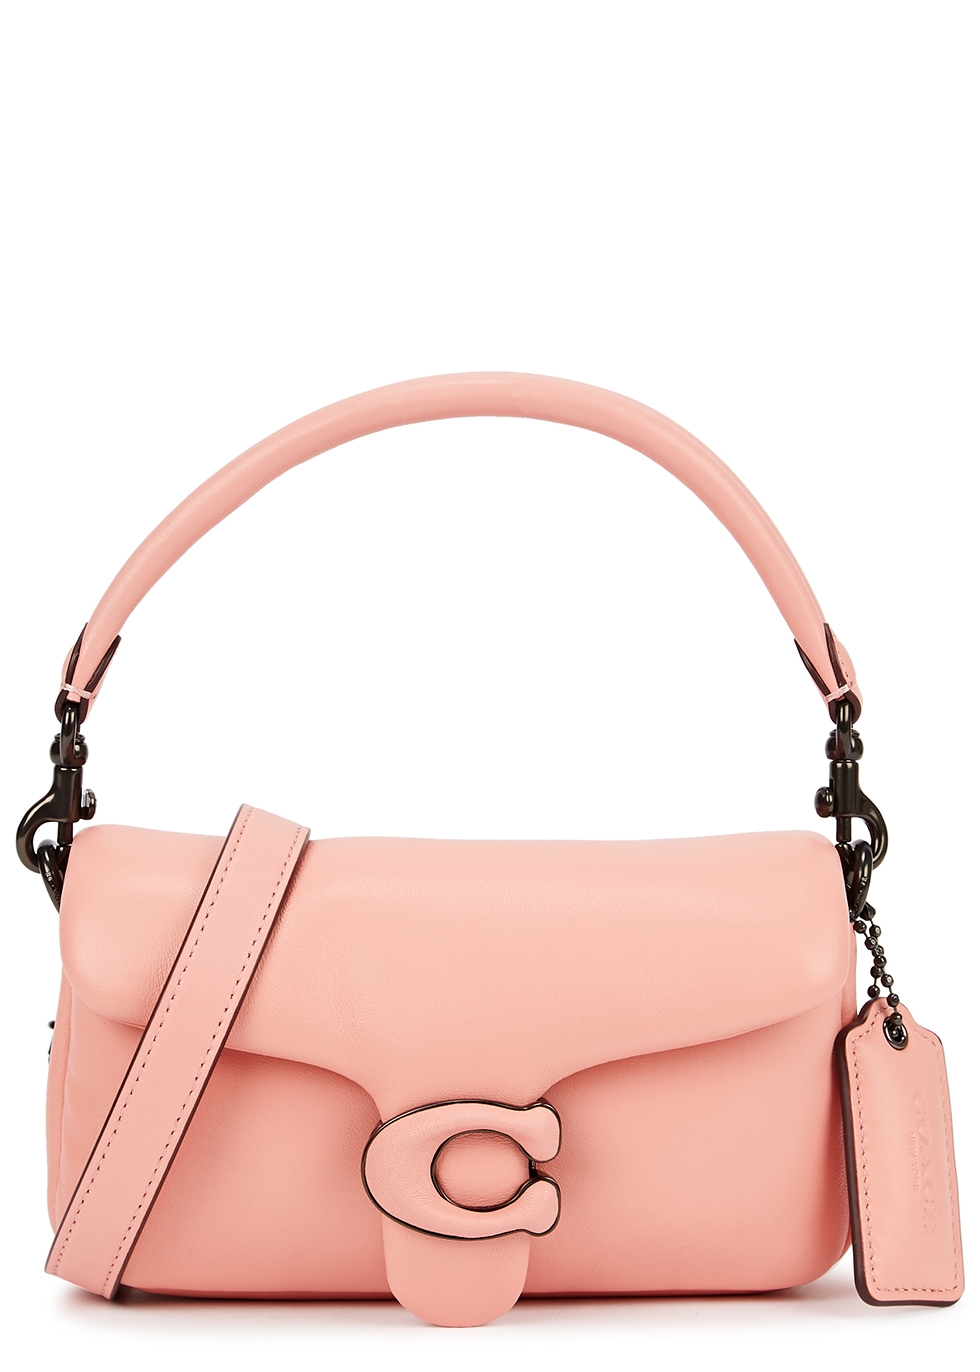 Pillow Tabby 18 pink leather cross-body bag